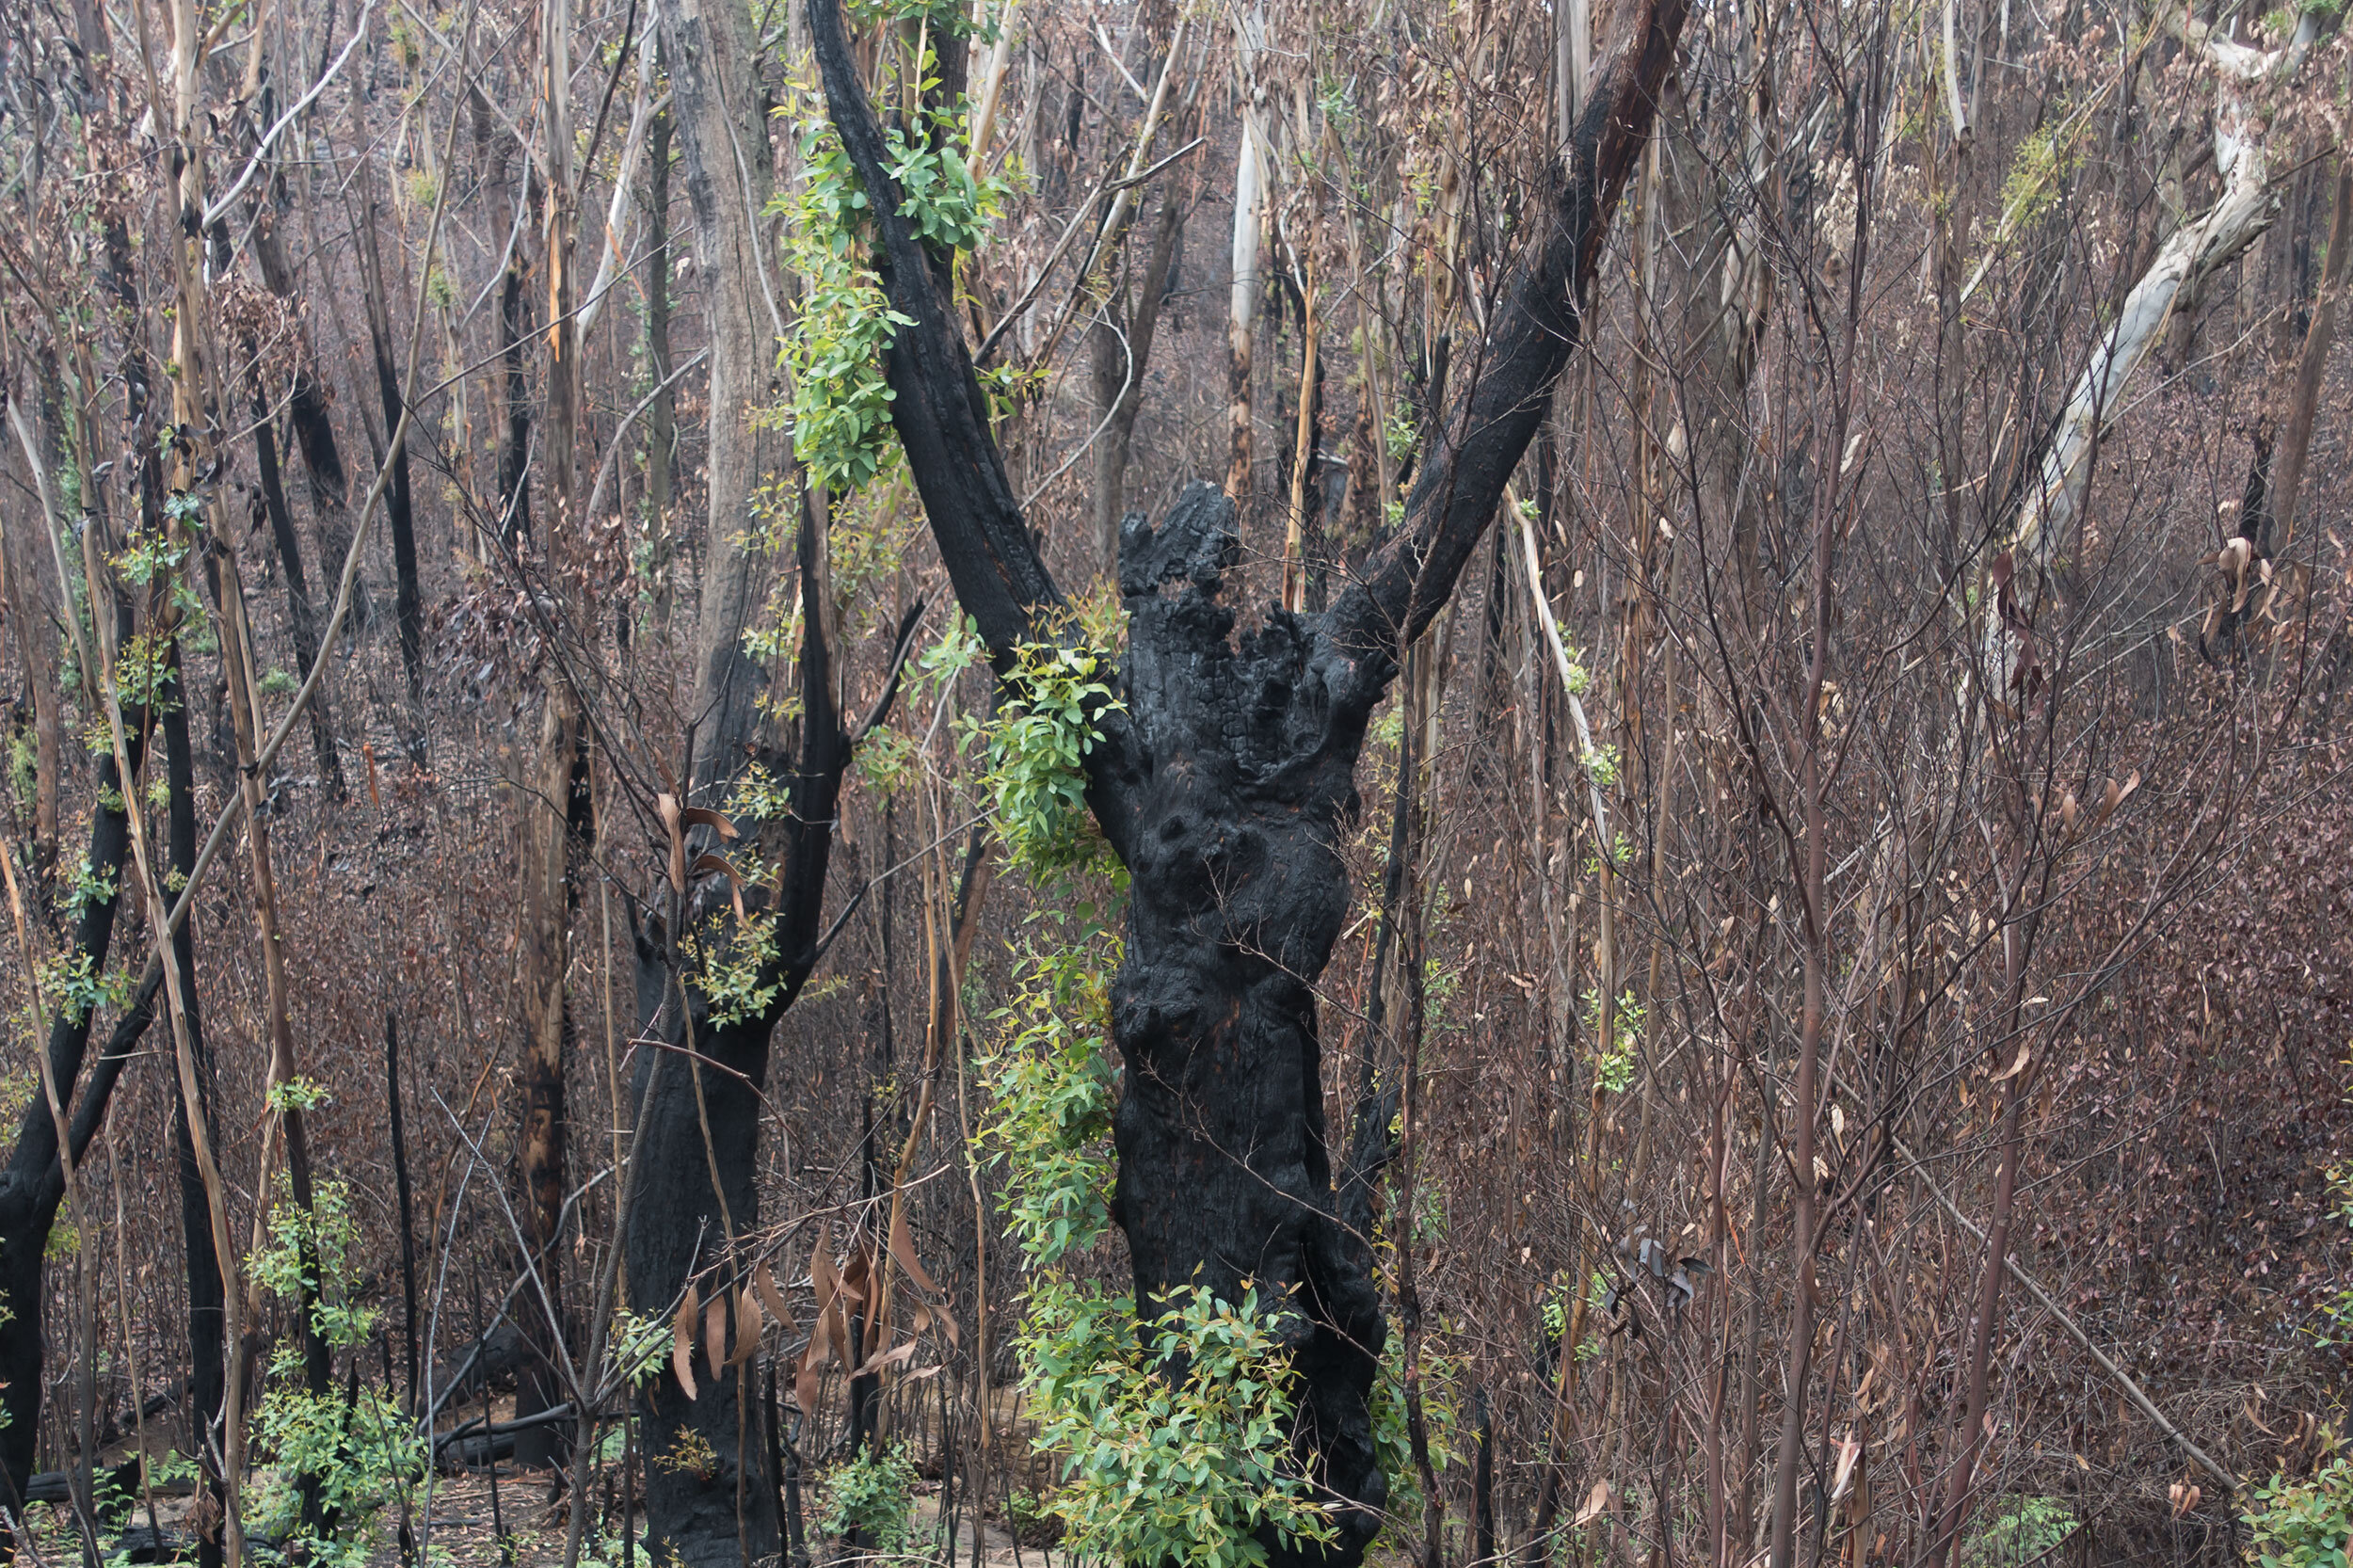 Sun 16 Feb 2020, Pierces Pass, Blue Mountains National Park, trauma redressed with regrowth.